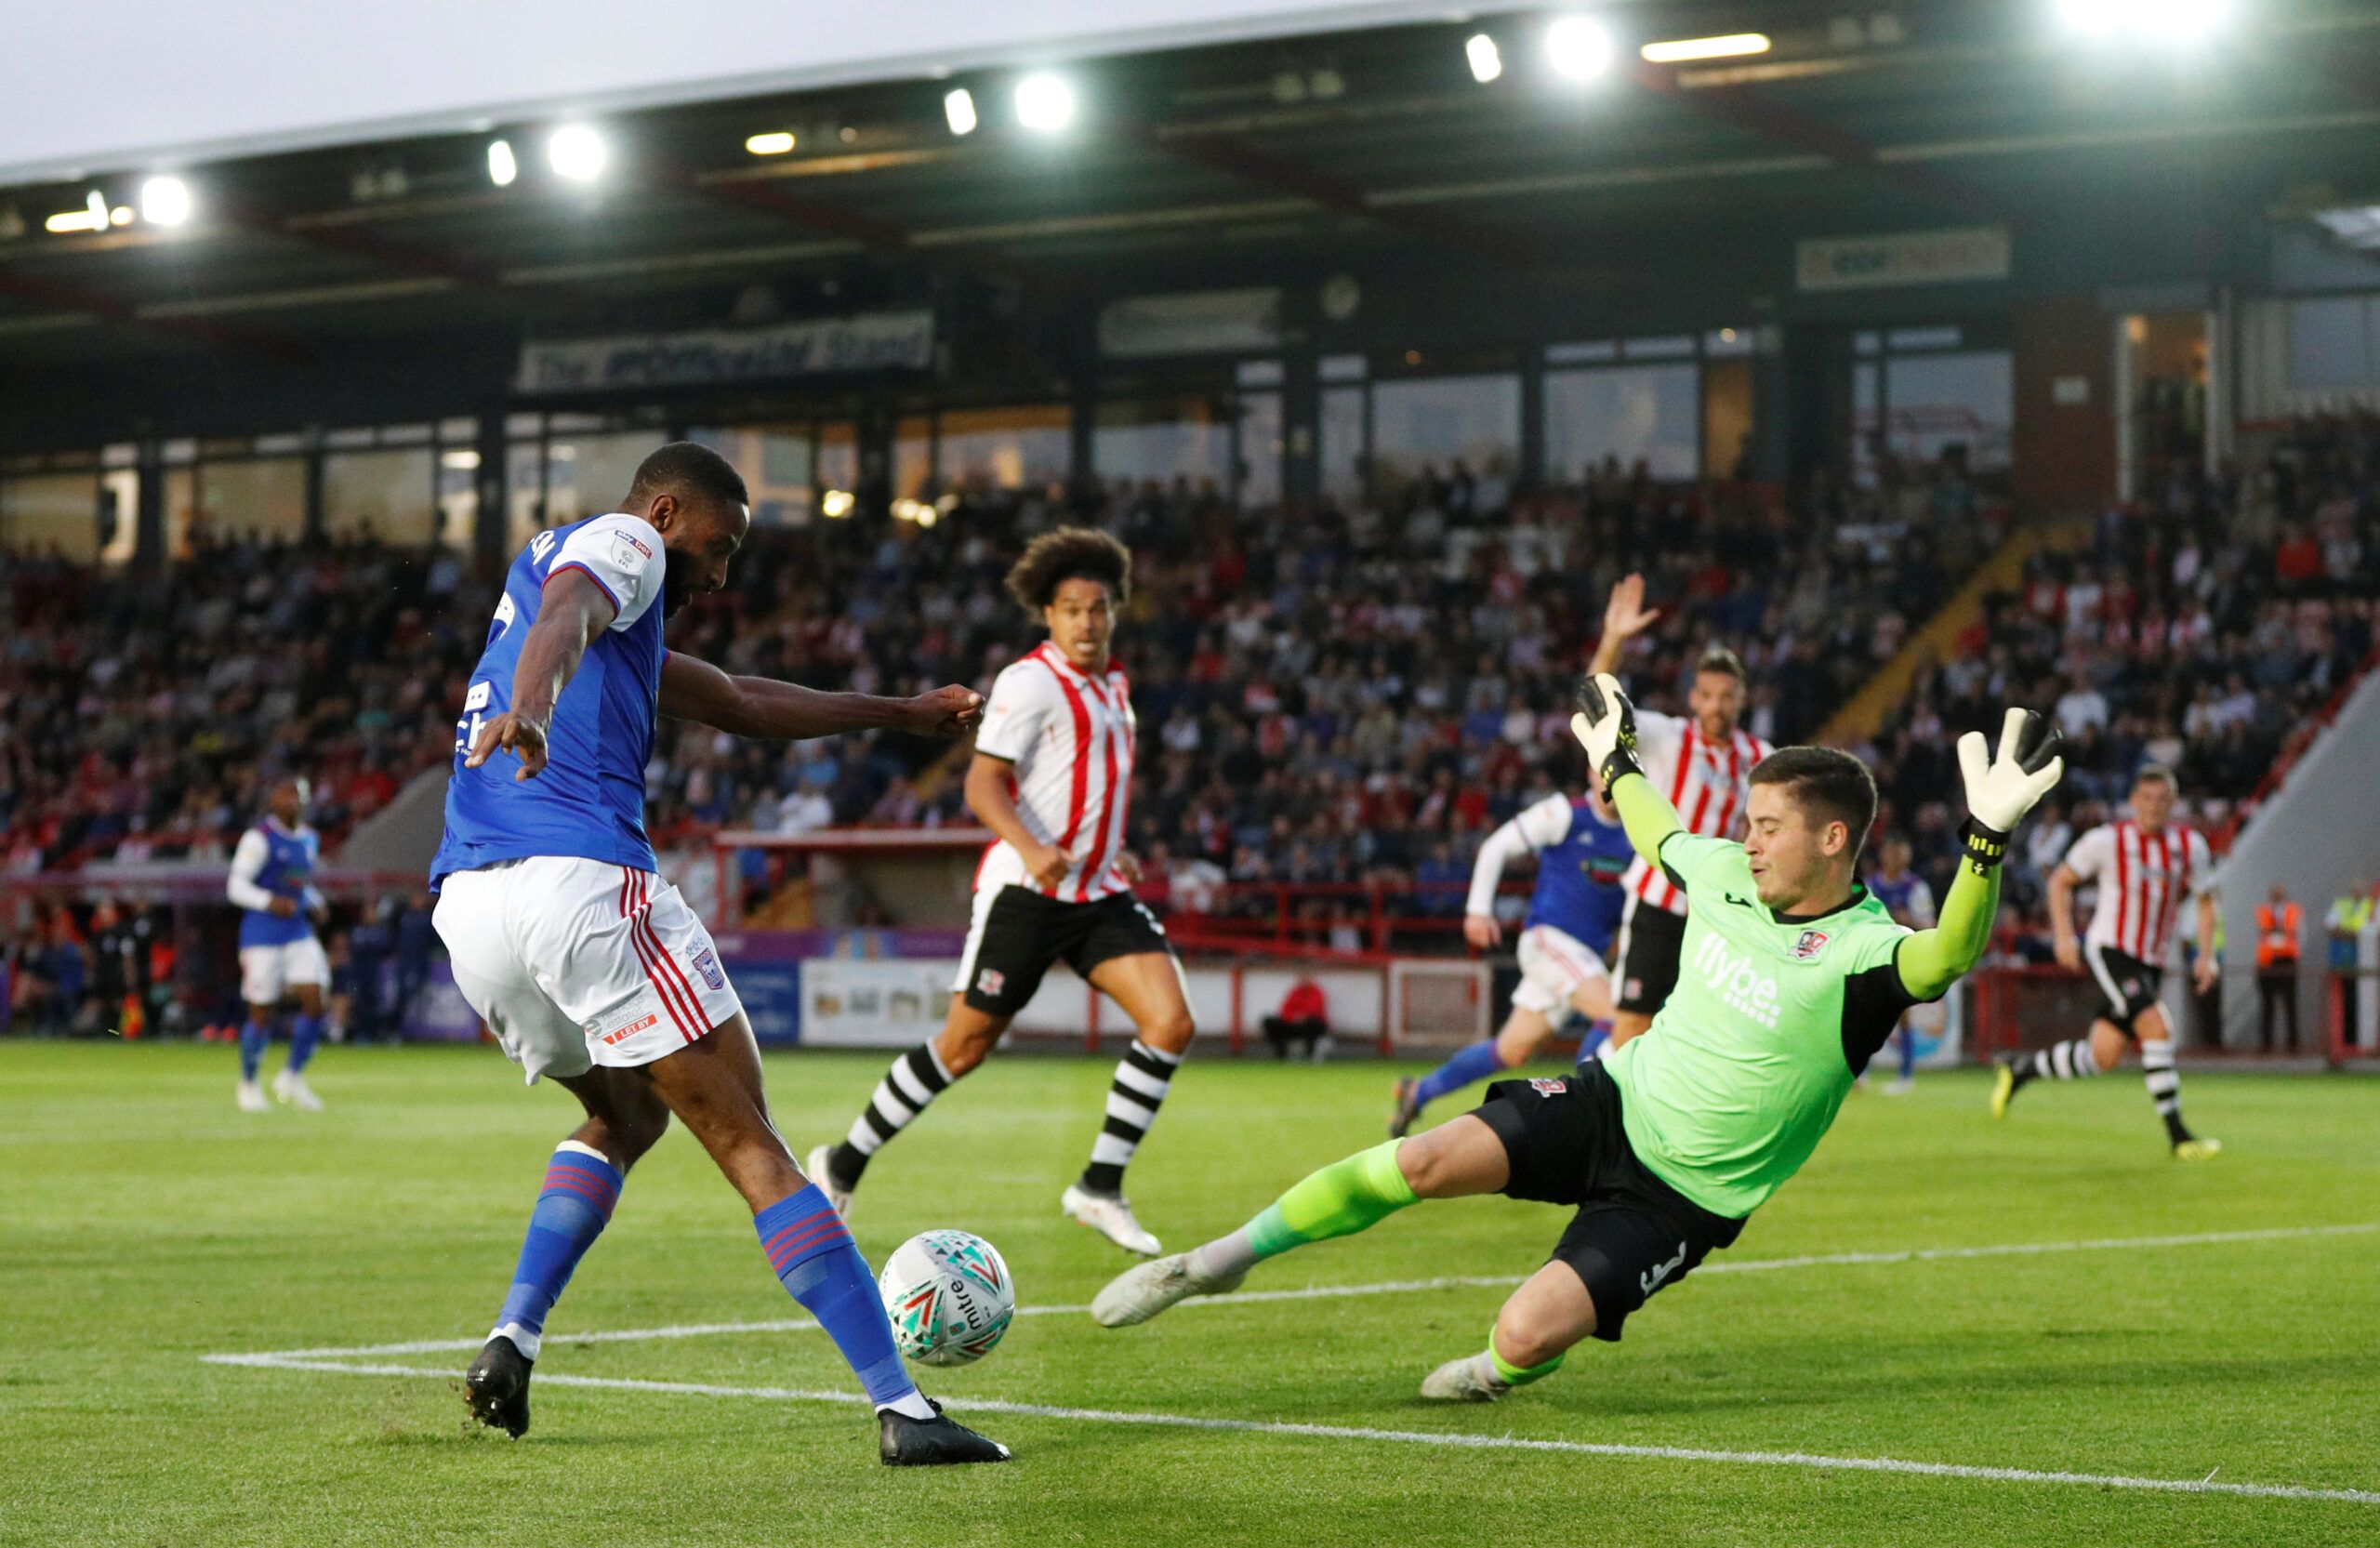 Soccer Football - Carabao Cup First Round - Exeter City v Ipswich Town - St James Park, Exeter, Britain - August 14, 2018  Ipswich Town’s Janoi Donacien in action with Exeter City’s Christy Pym  Action Images/John Sibley  EDITORIAL USE ONLY. No use with unauthorized audio, video, data, fixture lists, club/league logos or 